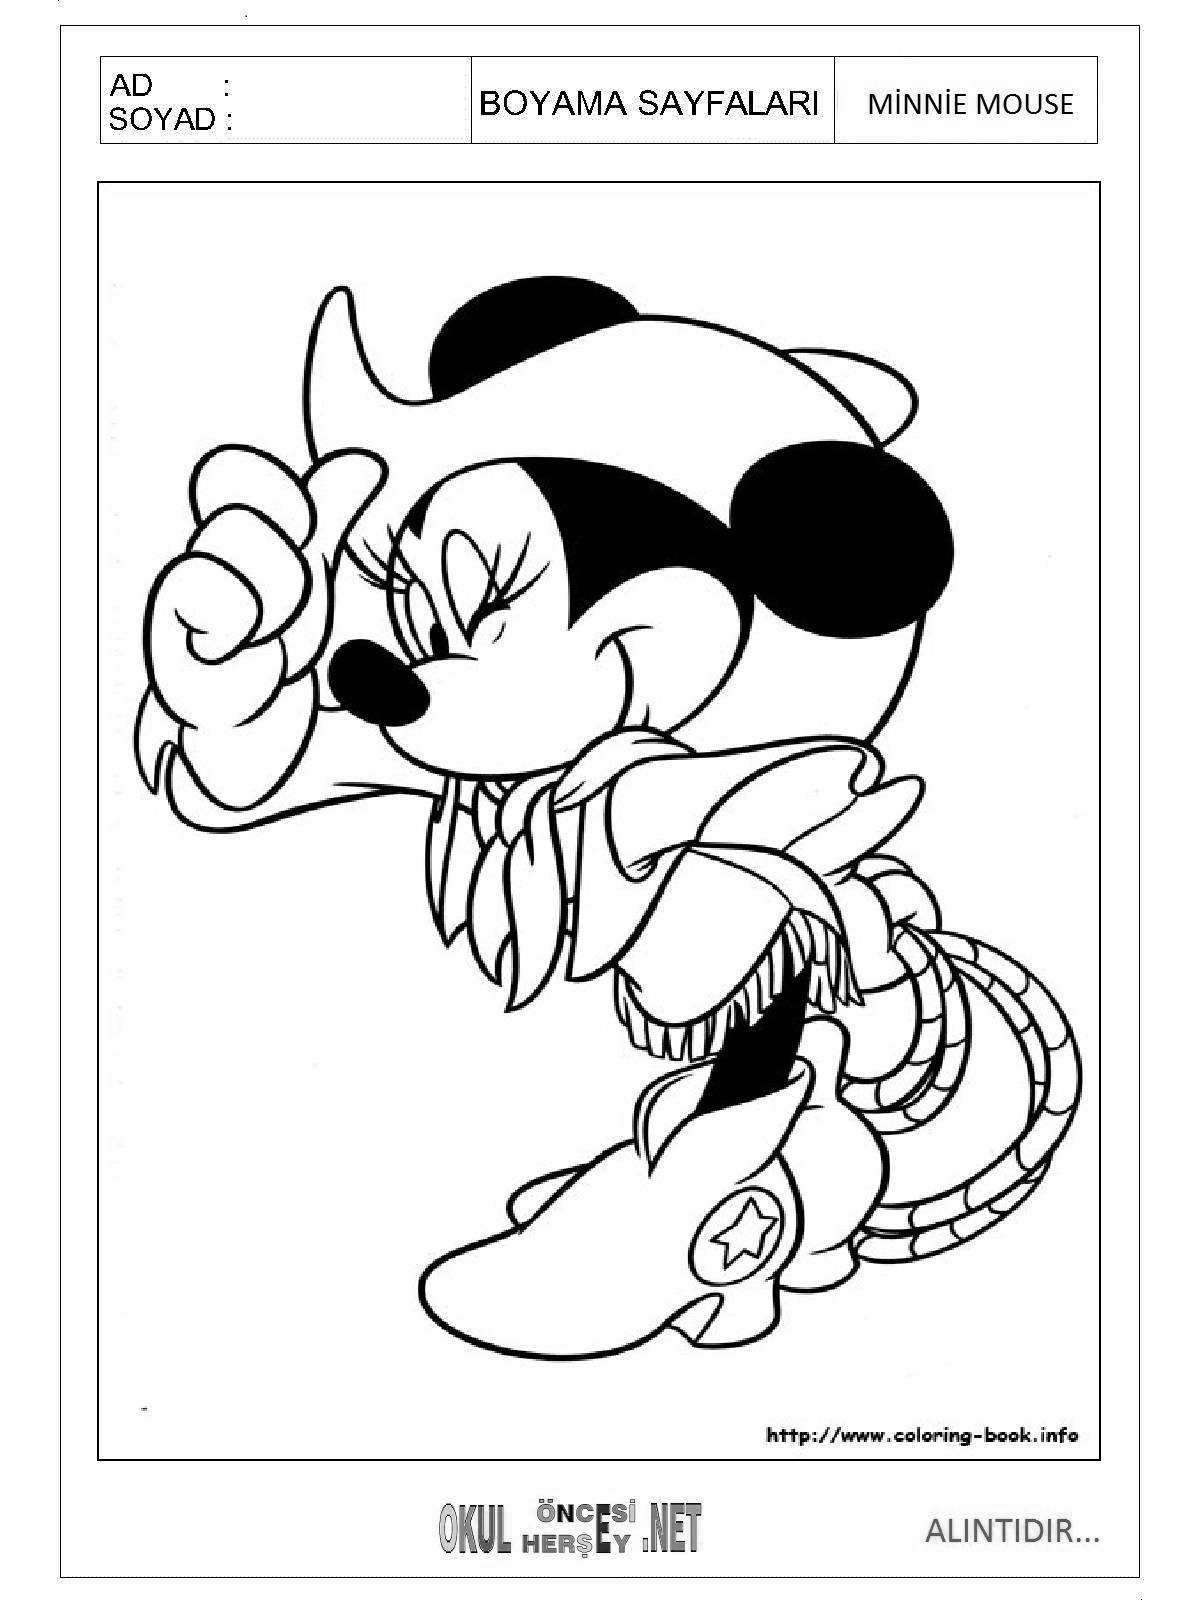 Fun coloring mighty mouse 1942